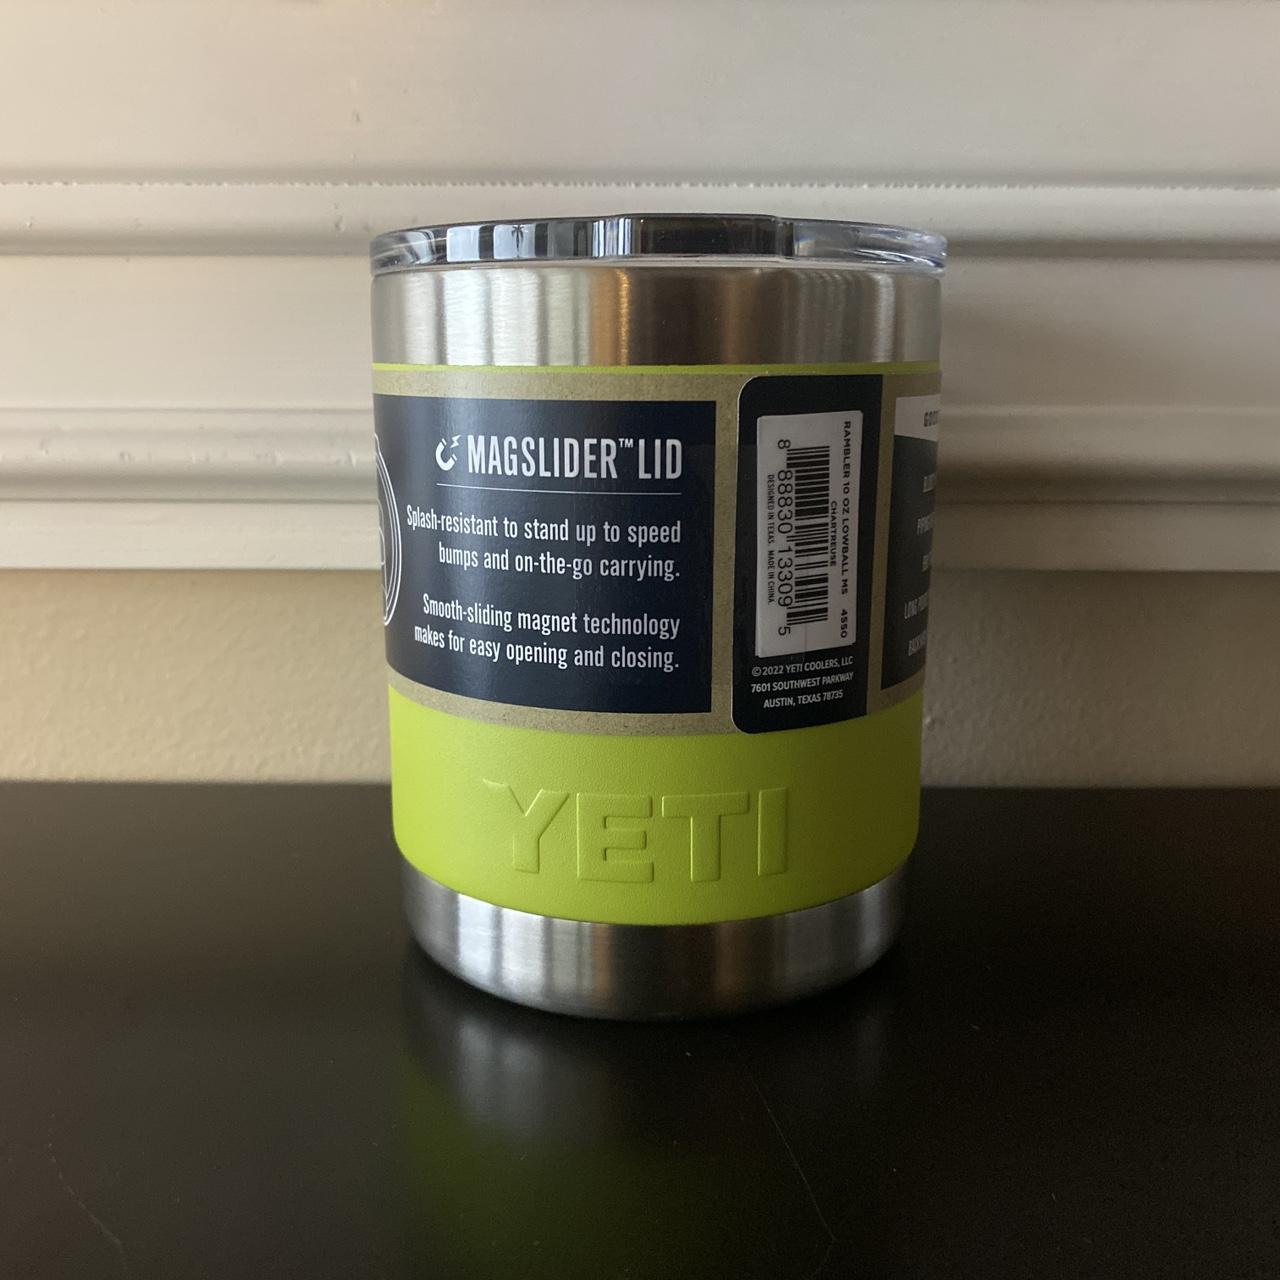 Yeti Bundle in Chartreuse color